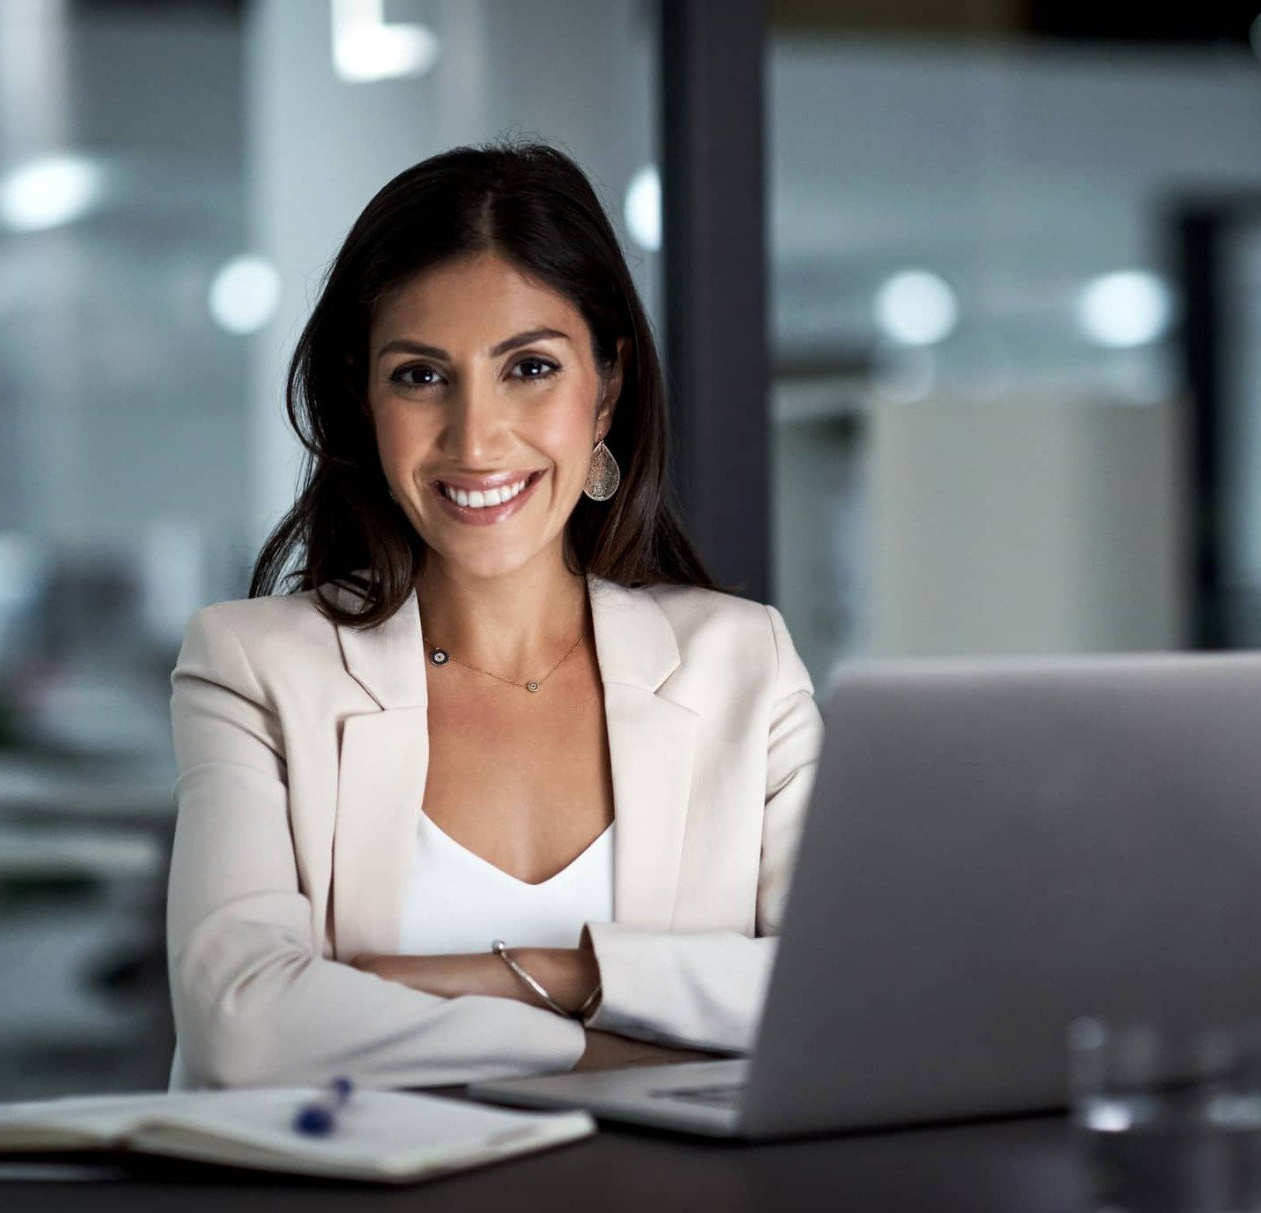 A businesswoman smiles and is seated at a table with her laptop and notepad